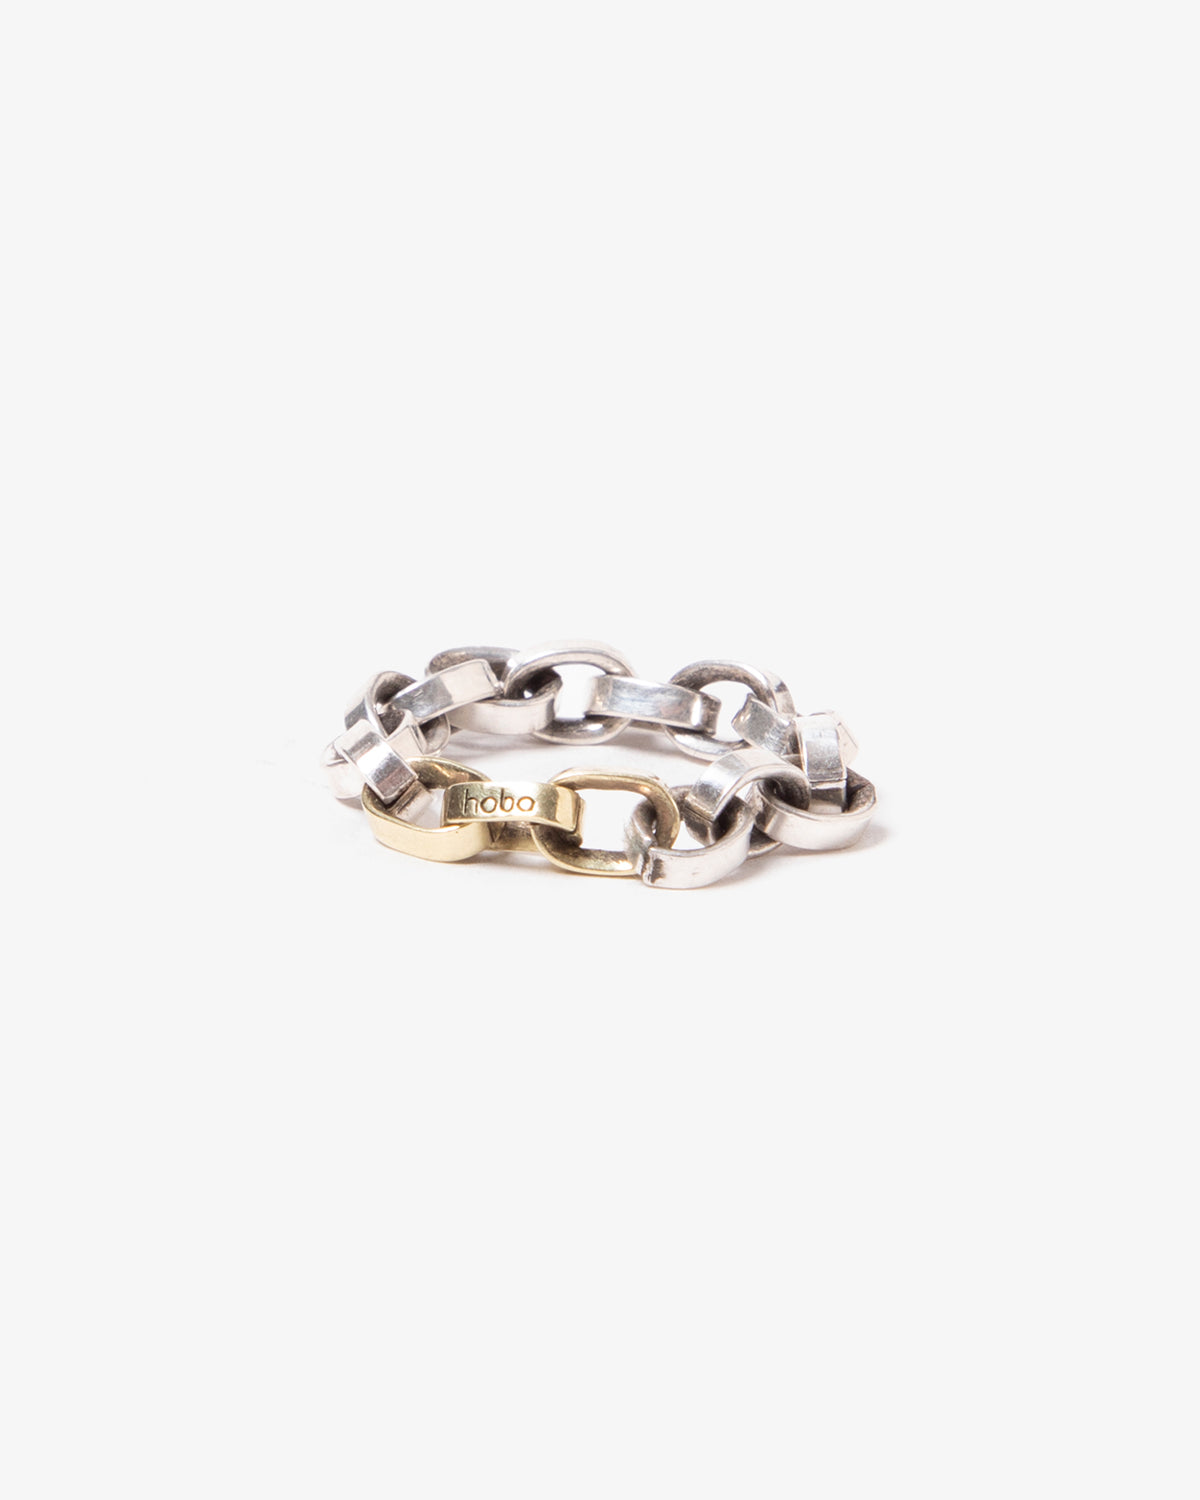 CHAIN RING 925 SILVER with BRASS